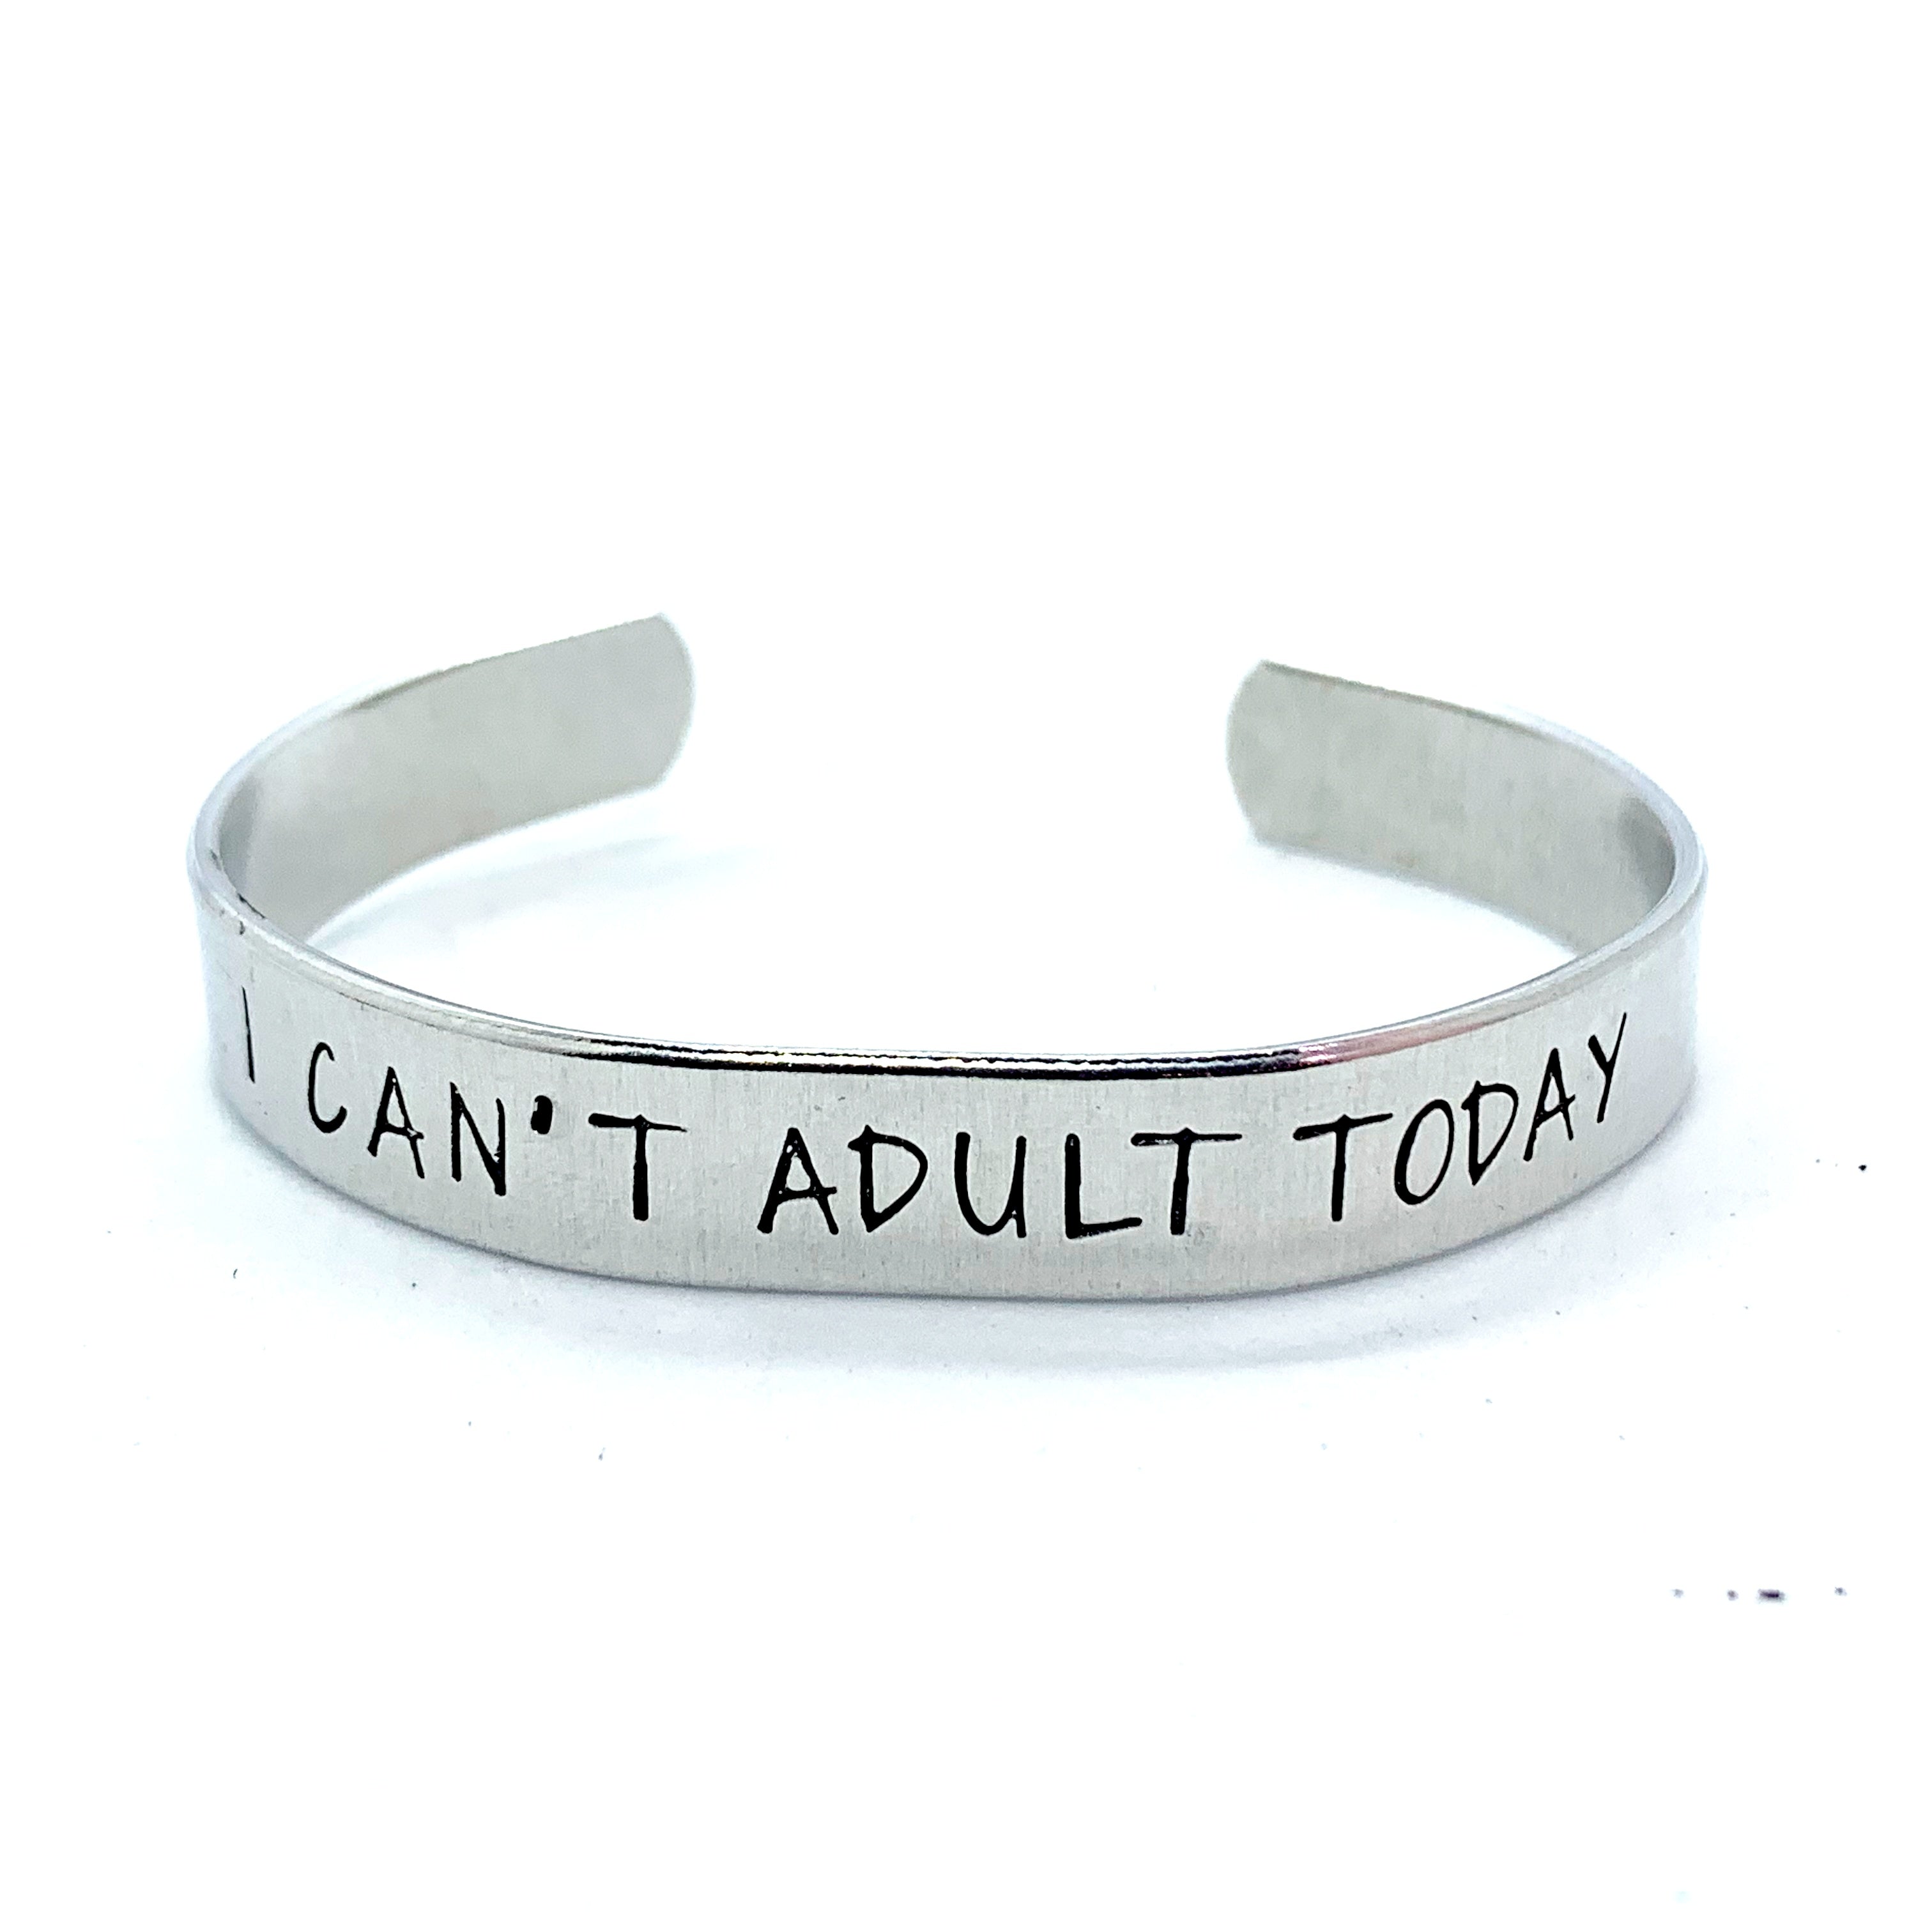 ⅜ inch Aluminum Cuff - I Can't Adult Today